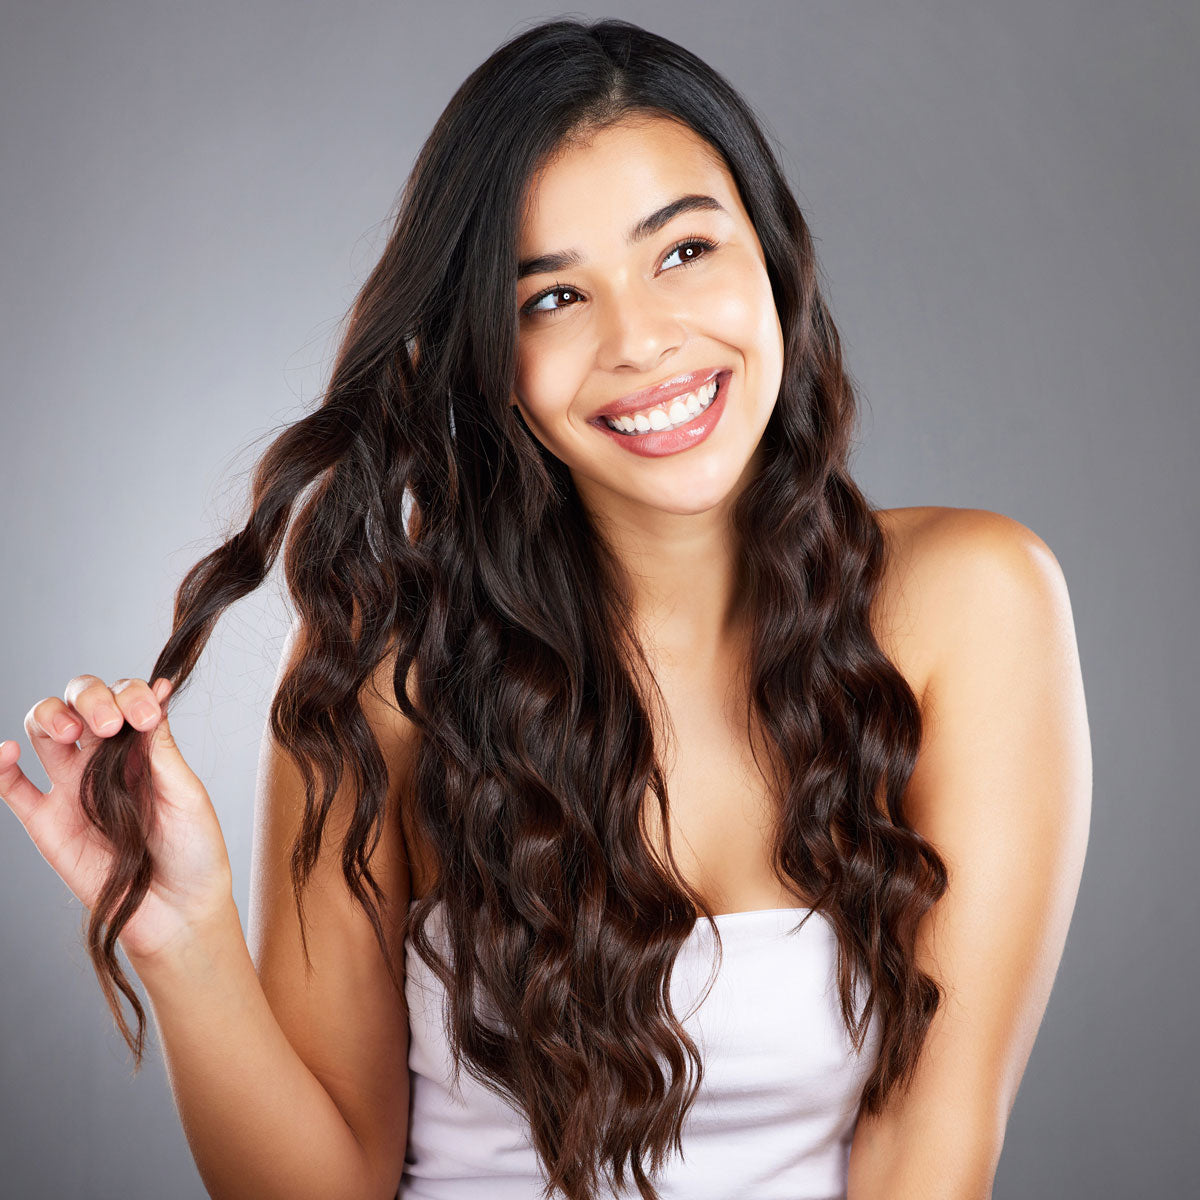 How Long Do Hair Extensions Last?